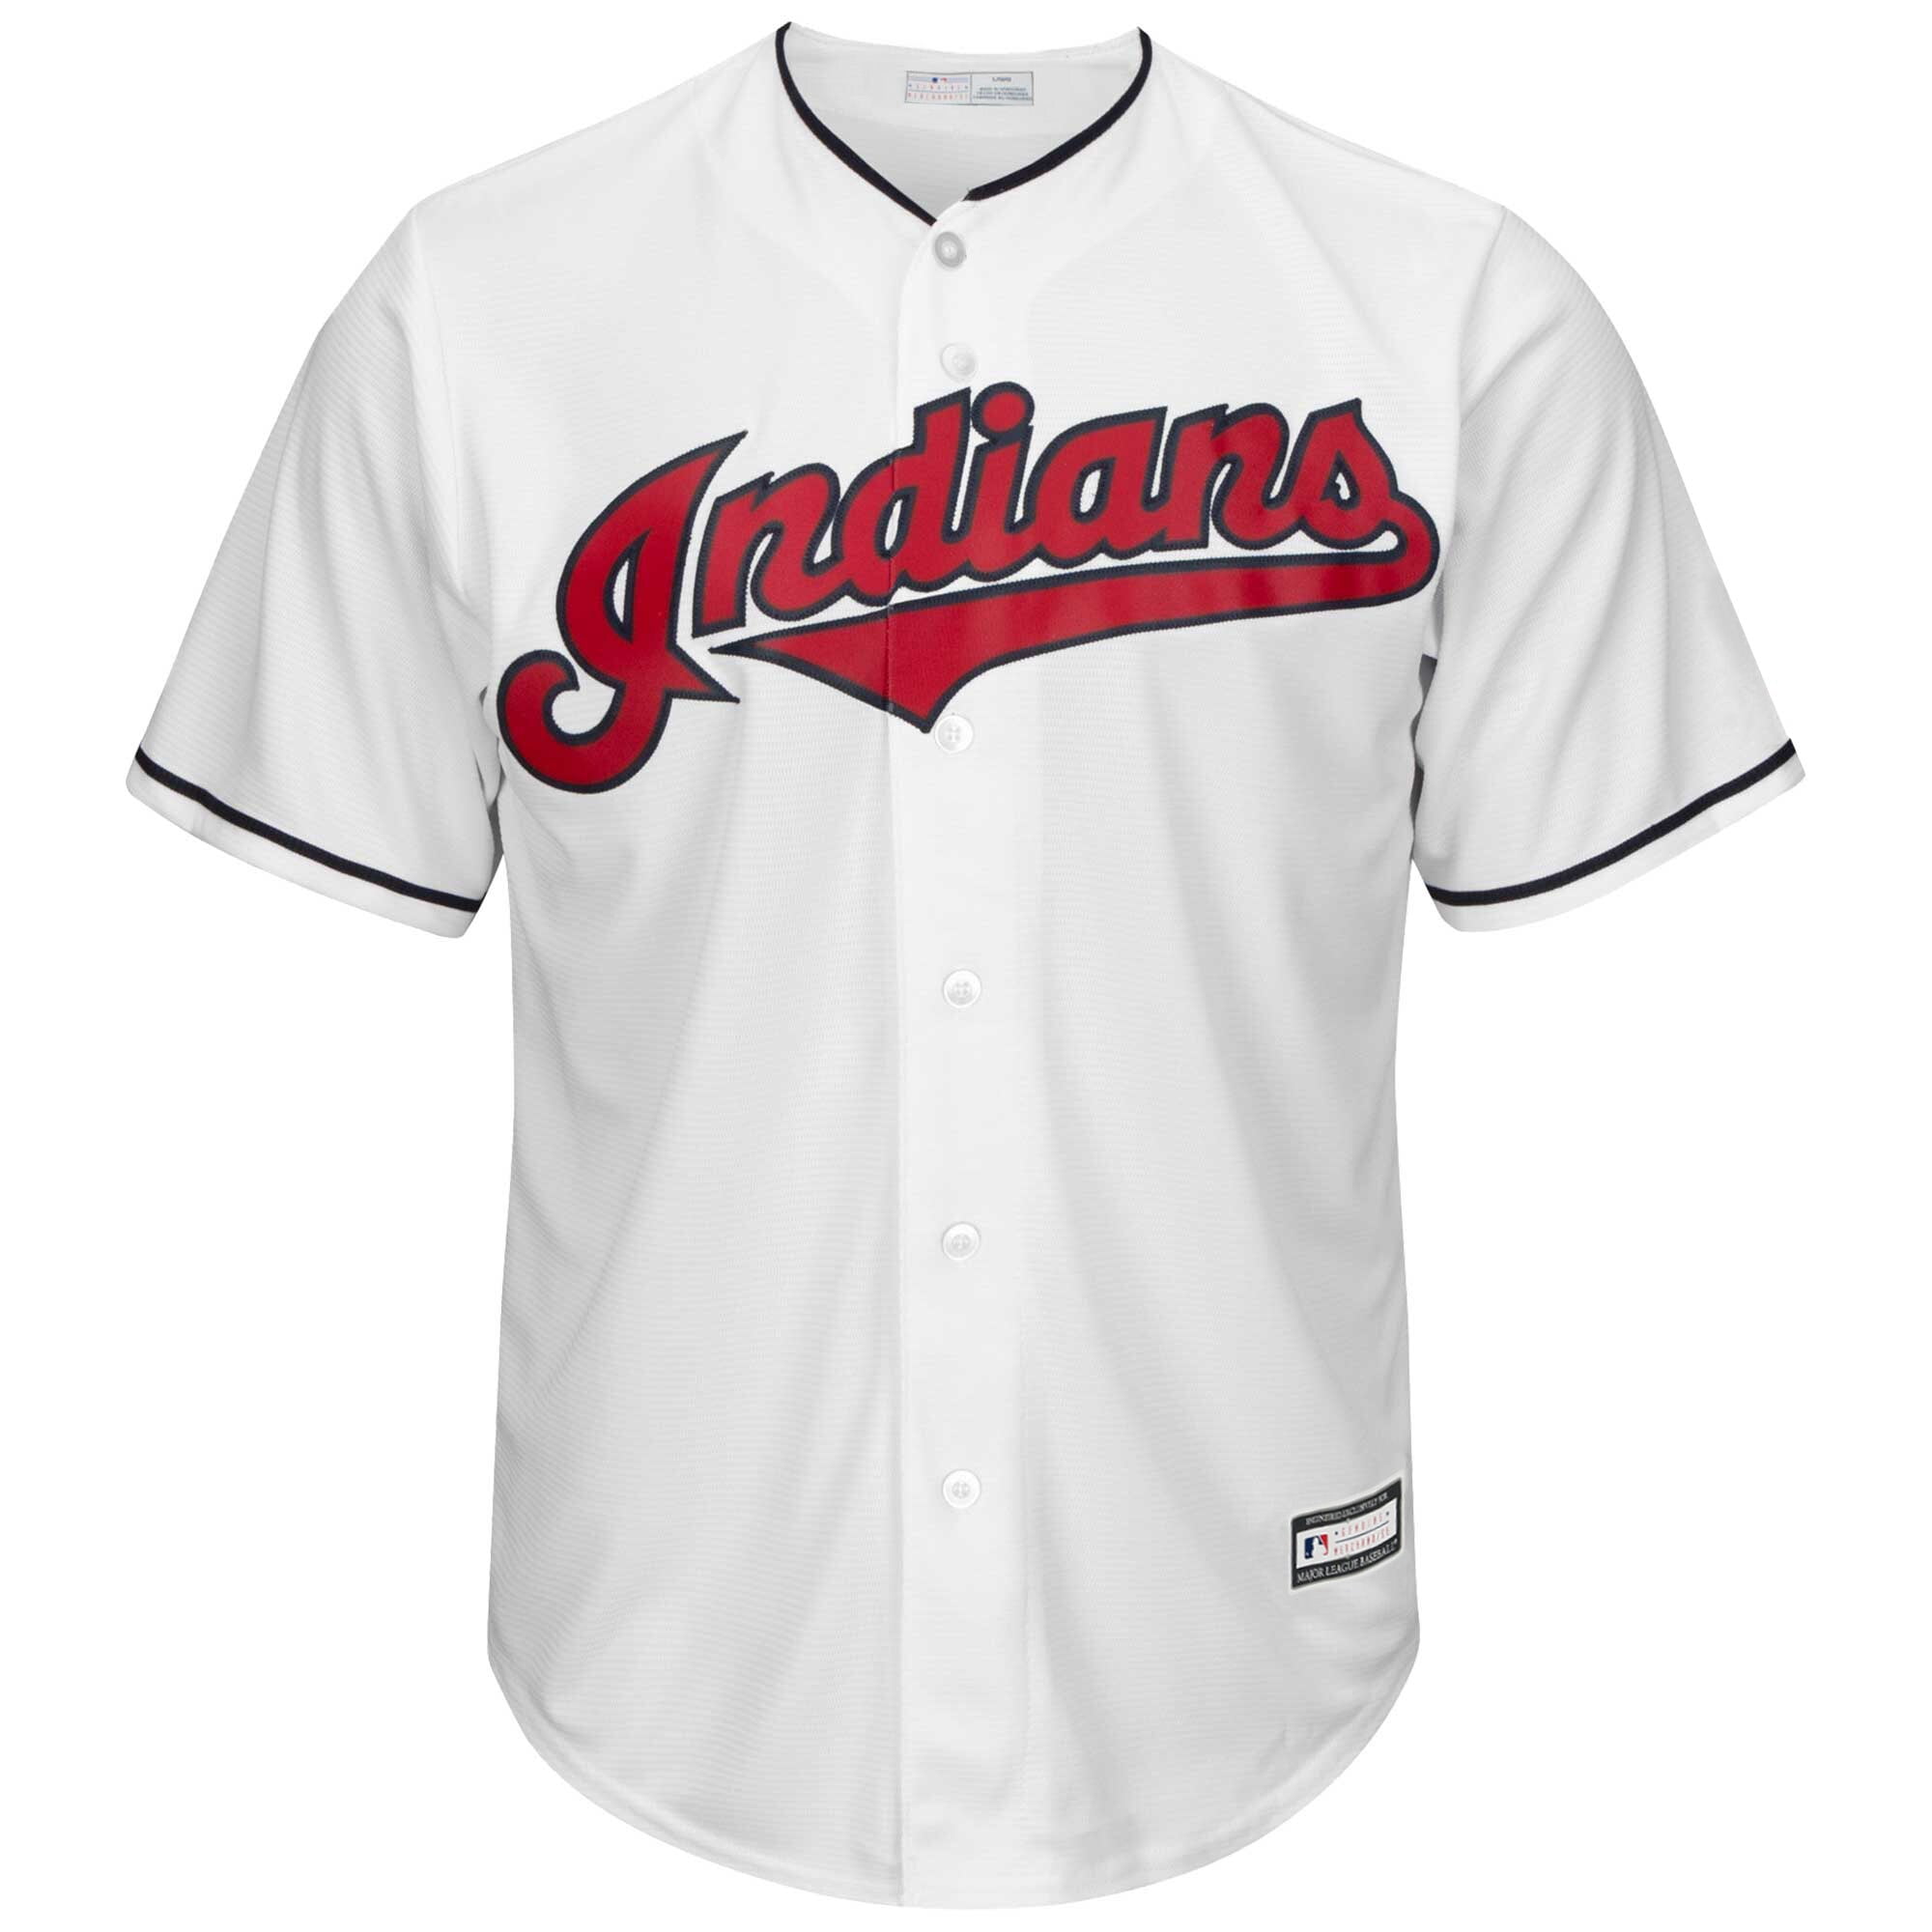 youth lindor jersey